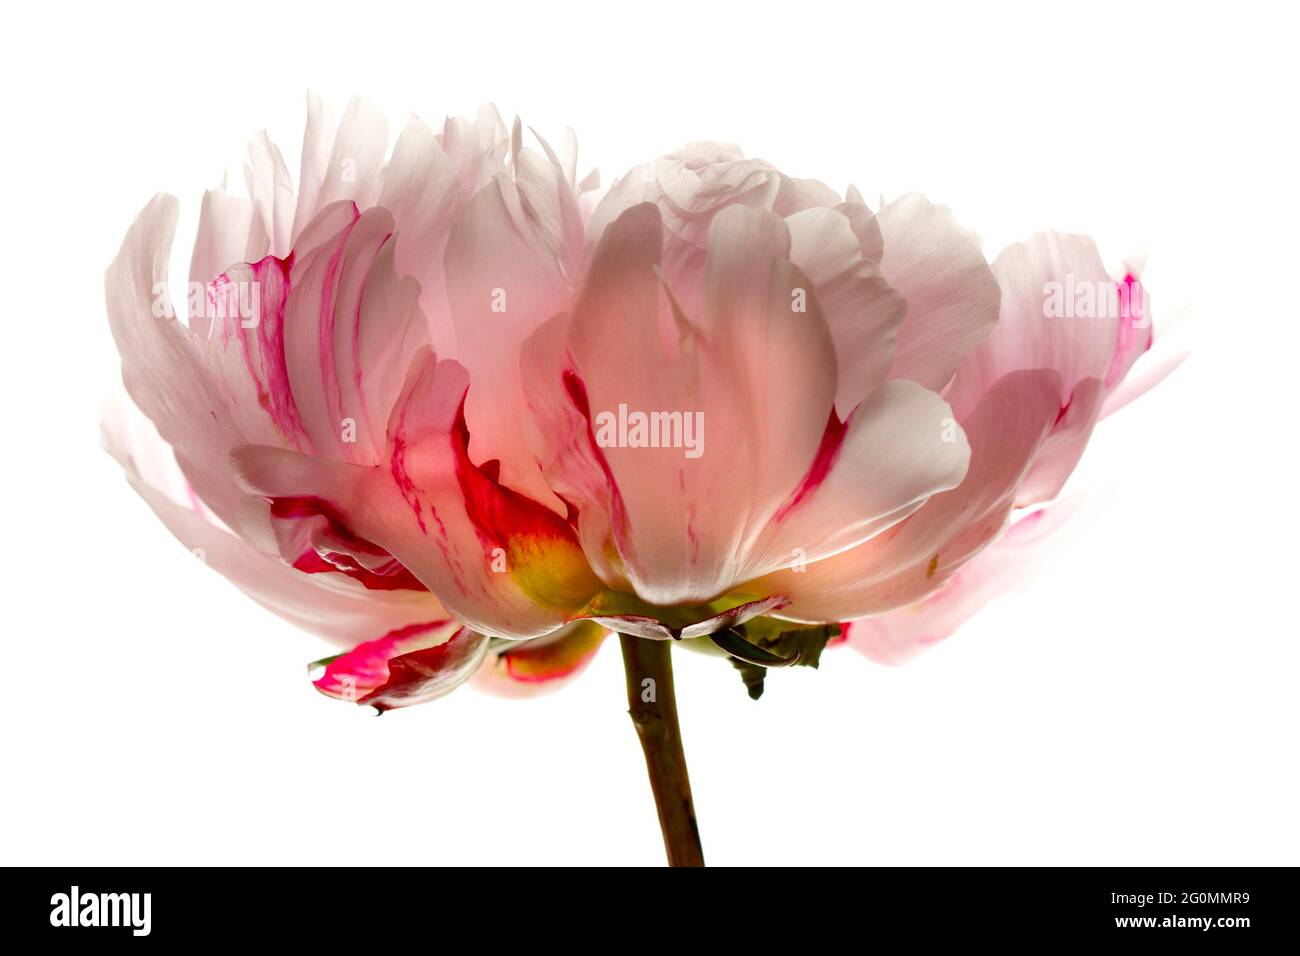 A high-key studio image (white background) of a pale pink/white peony marbled with raspberry: Paeonia Lactiflora Candy Stripe, a beautiful flower. Stock Photo